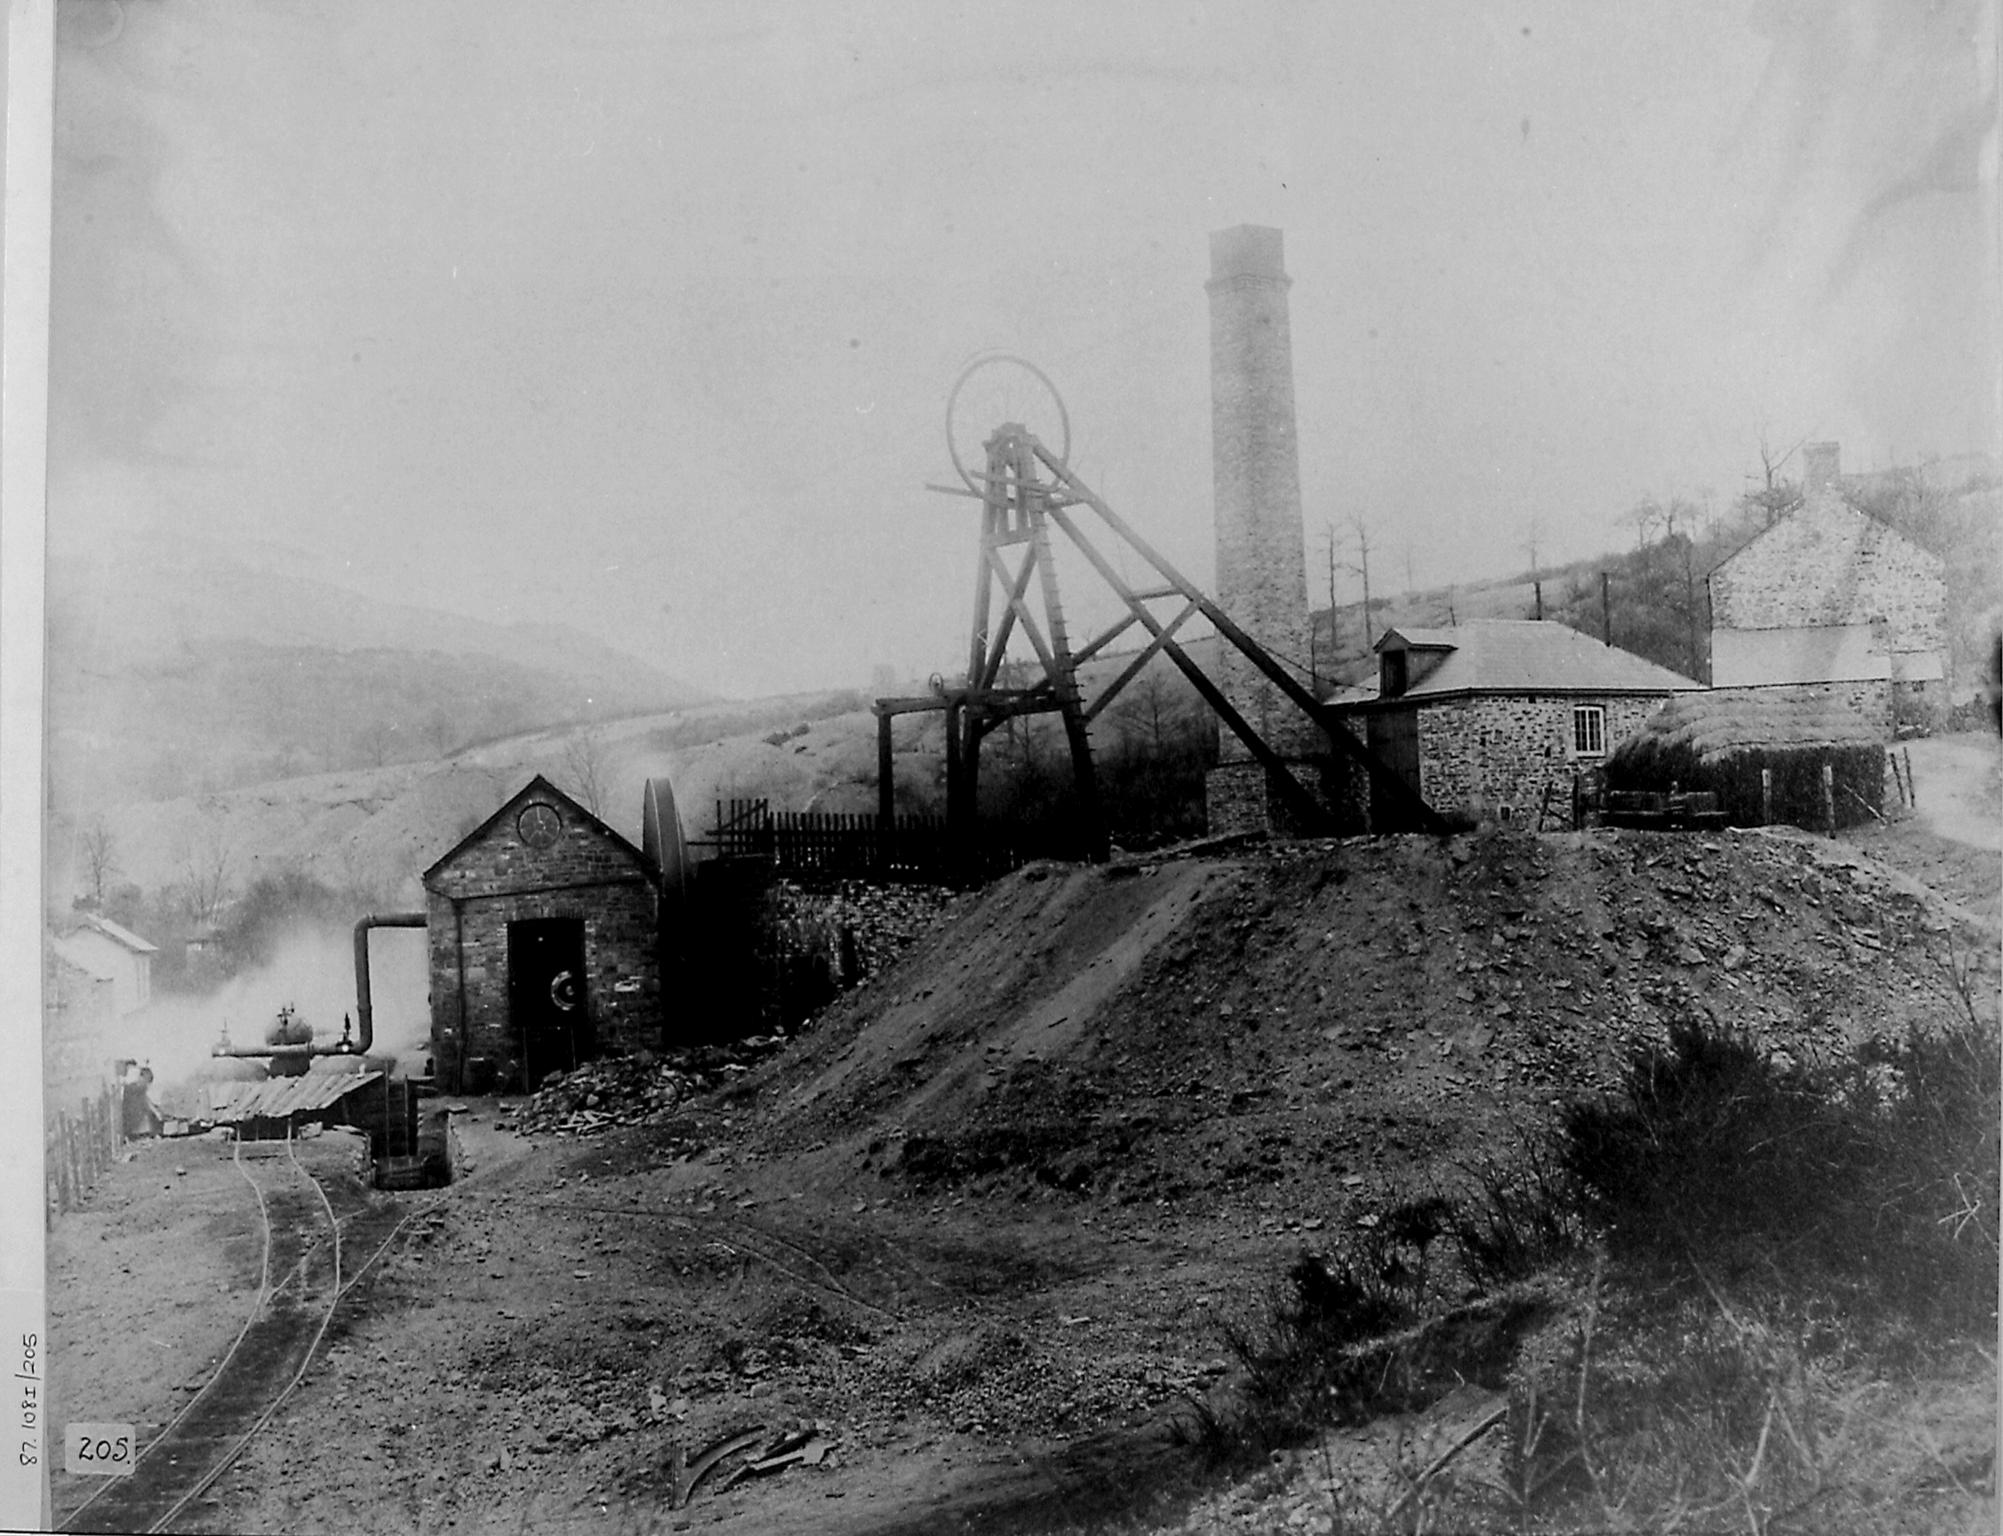 Maritime Colliery, photograph